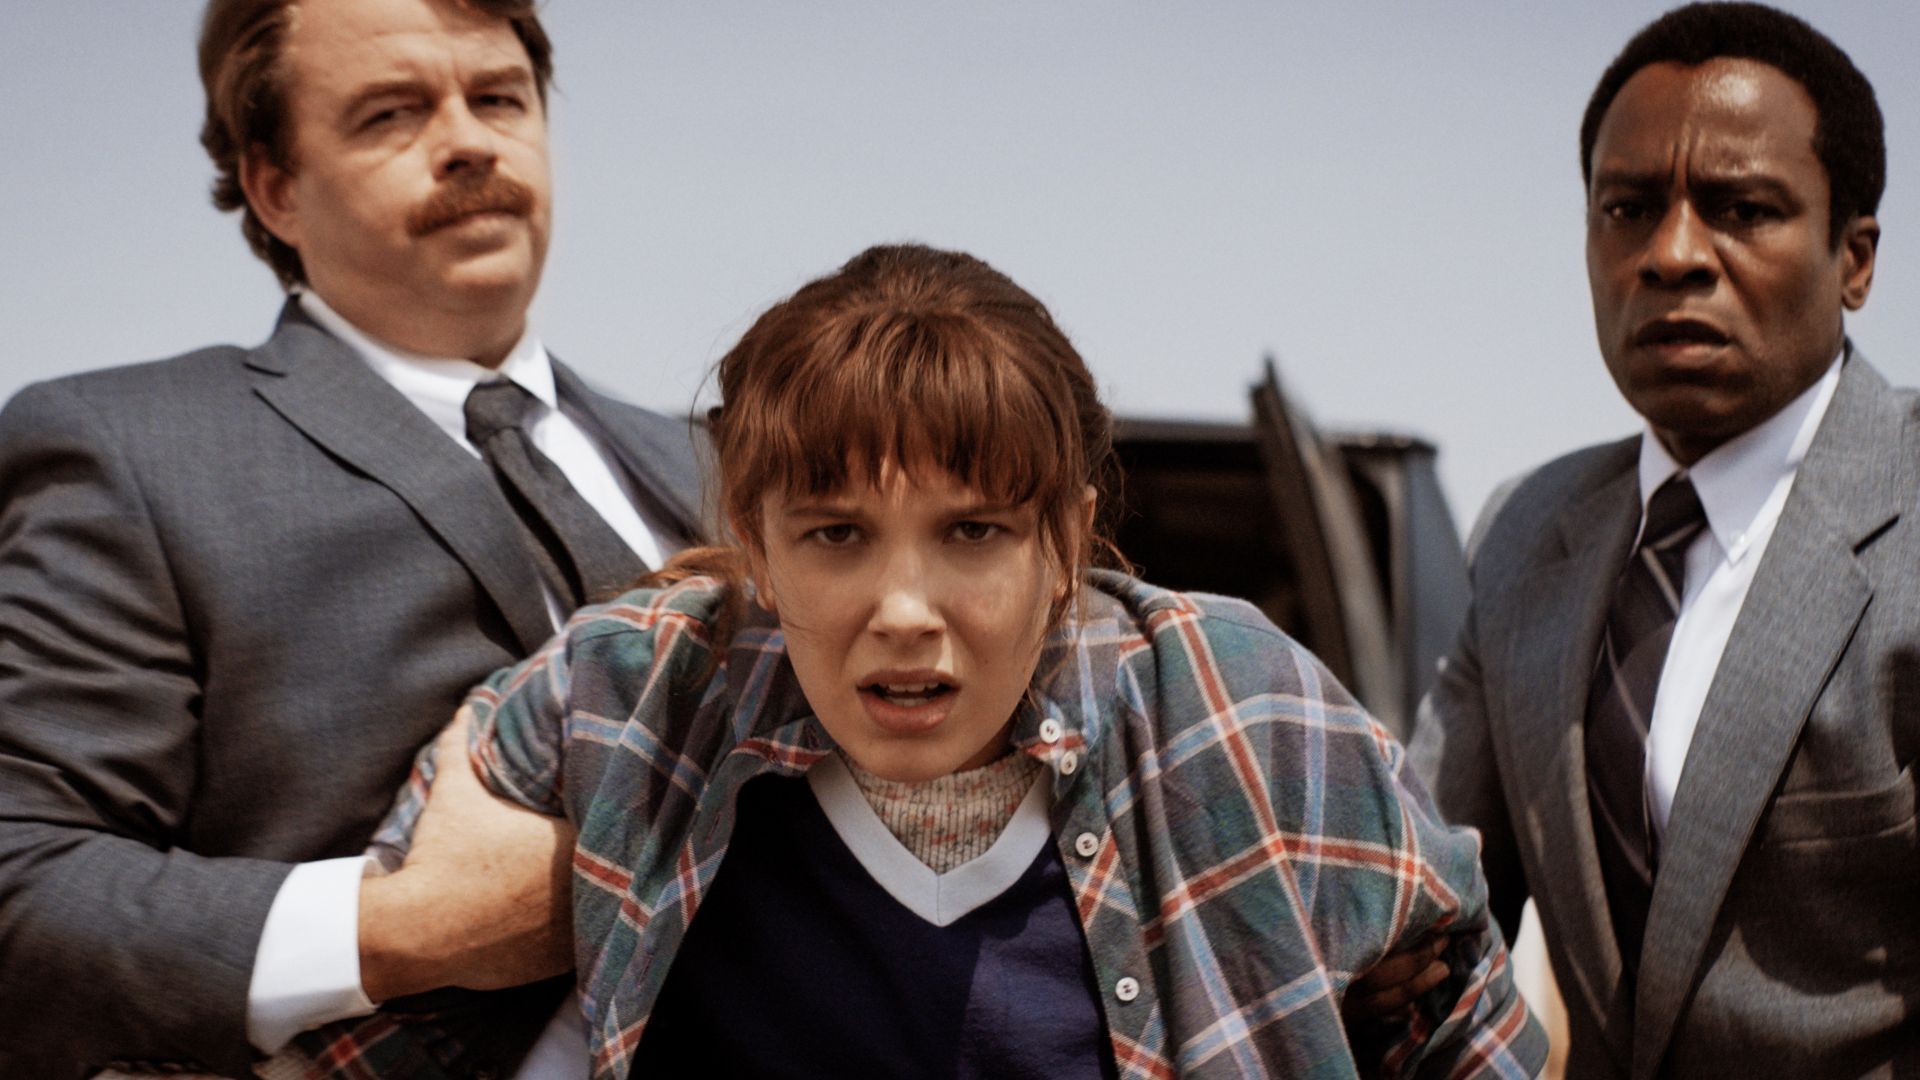 The Stranger Things character who was meant to die in season 4